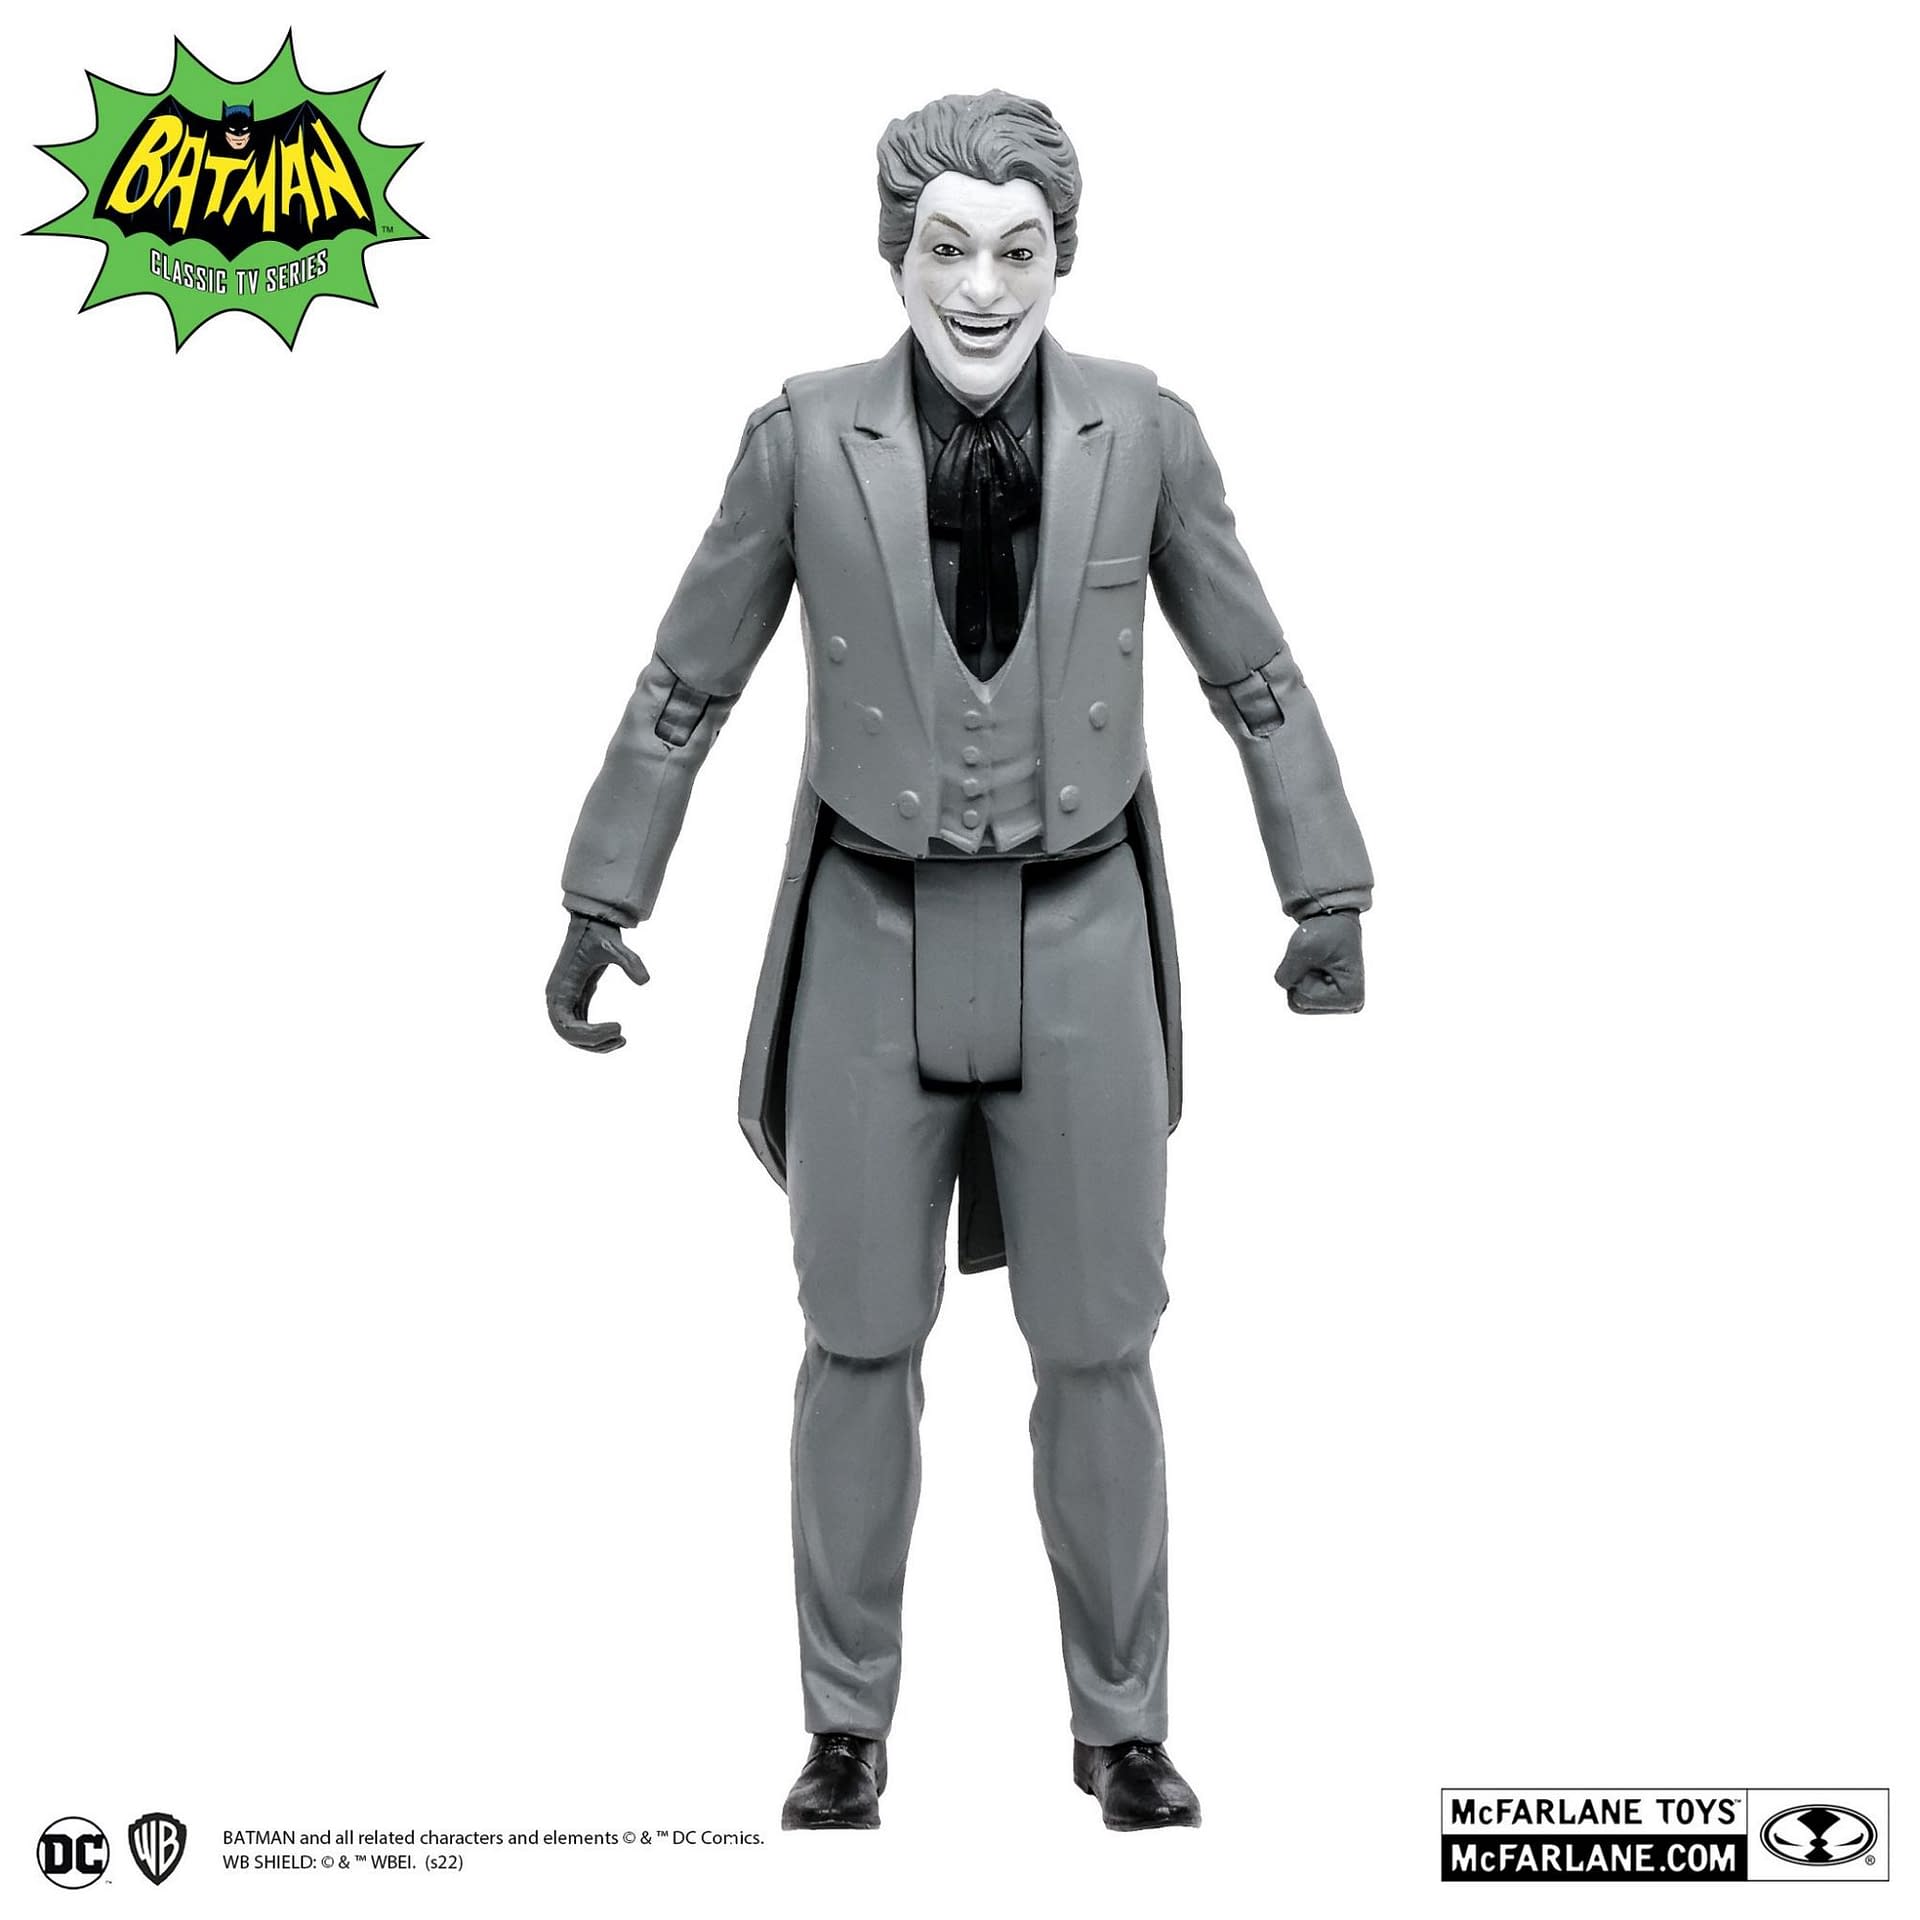 Black and White Batman and Joker 66' Figures Unveiled by McFarlane